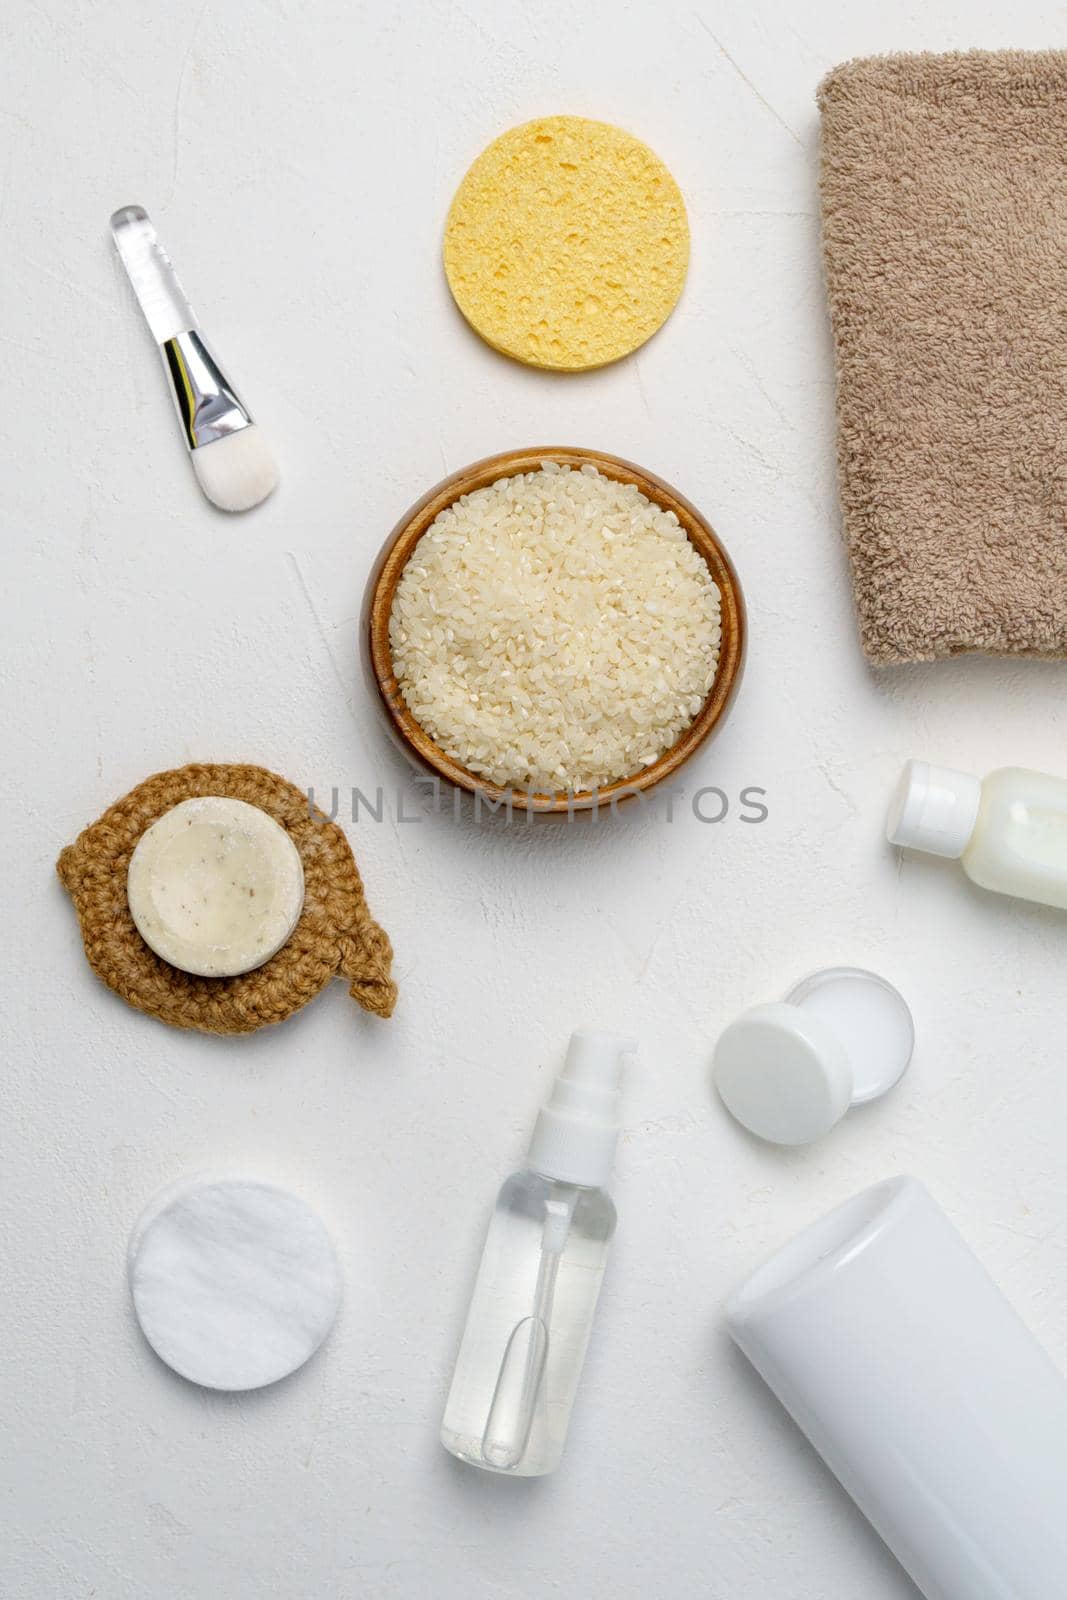 Fermented beauty products with, rice. Natural cosmetics for skin and hair care. by darksoul72